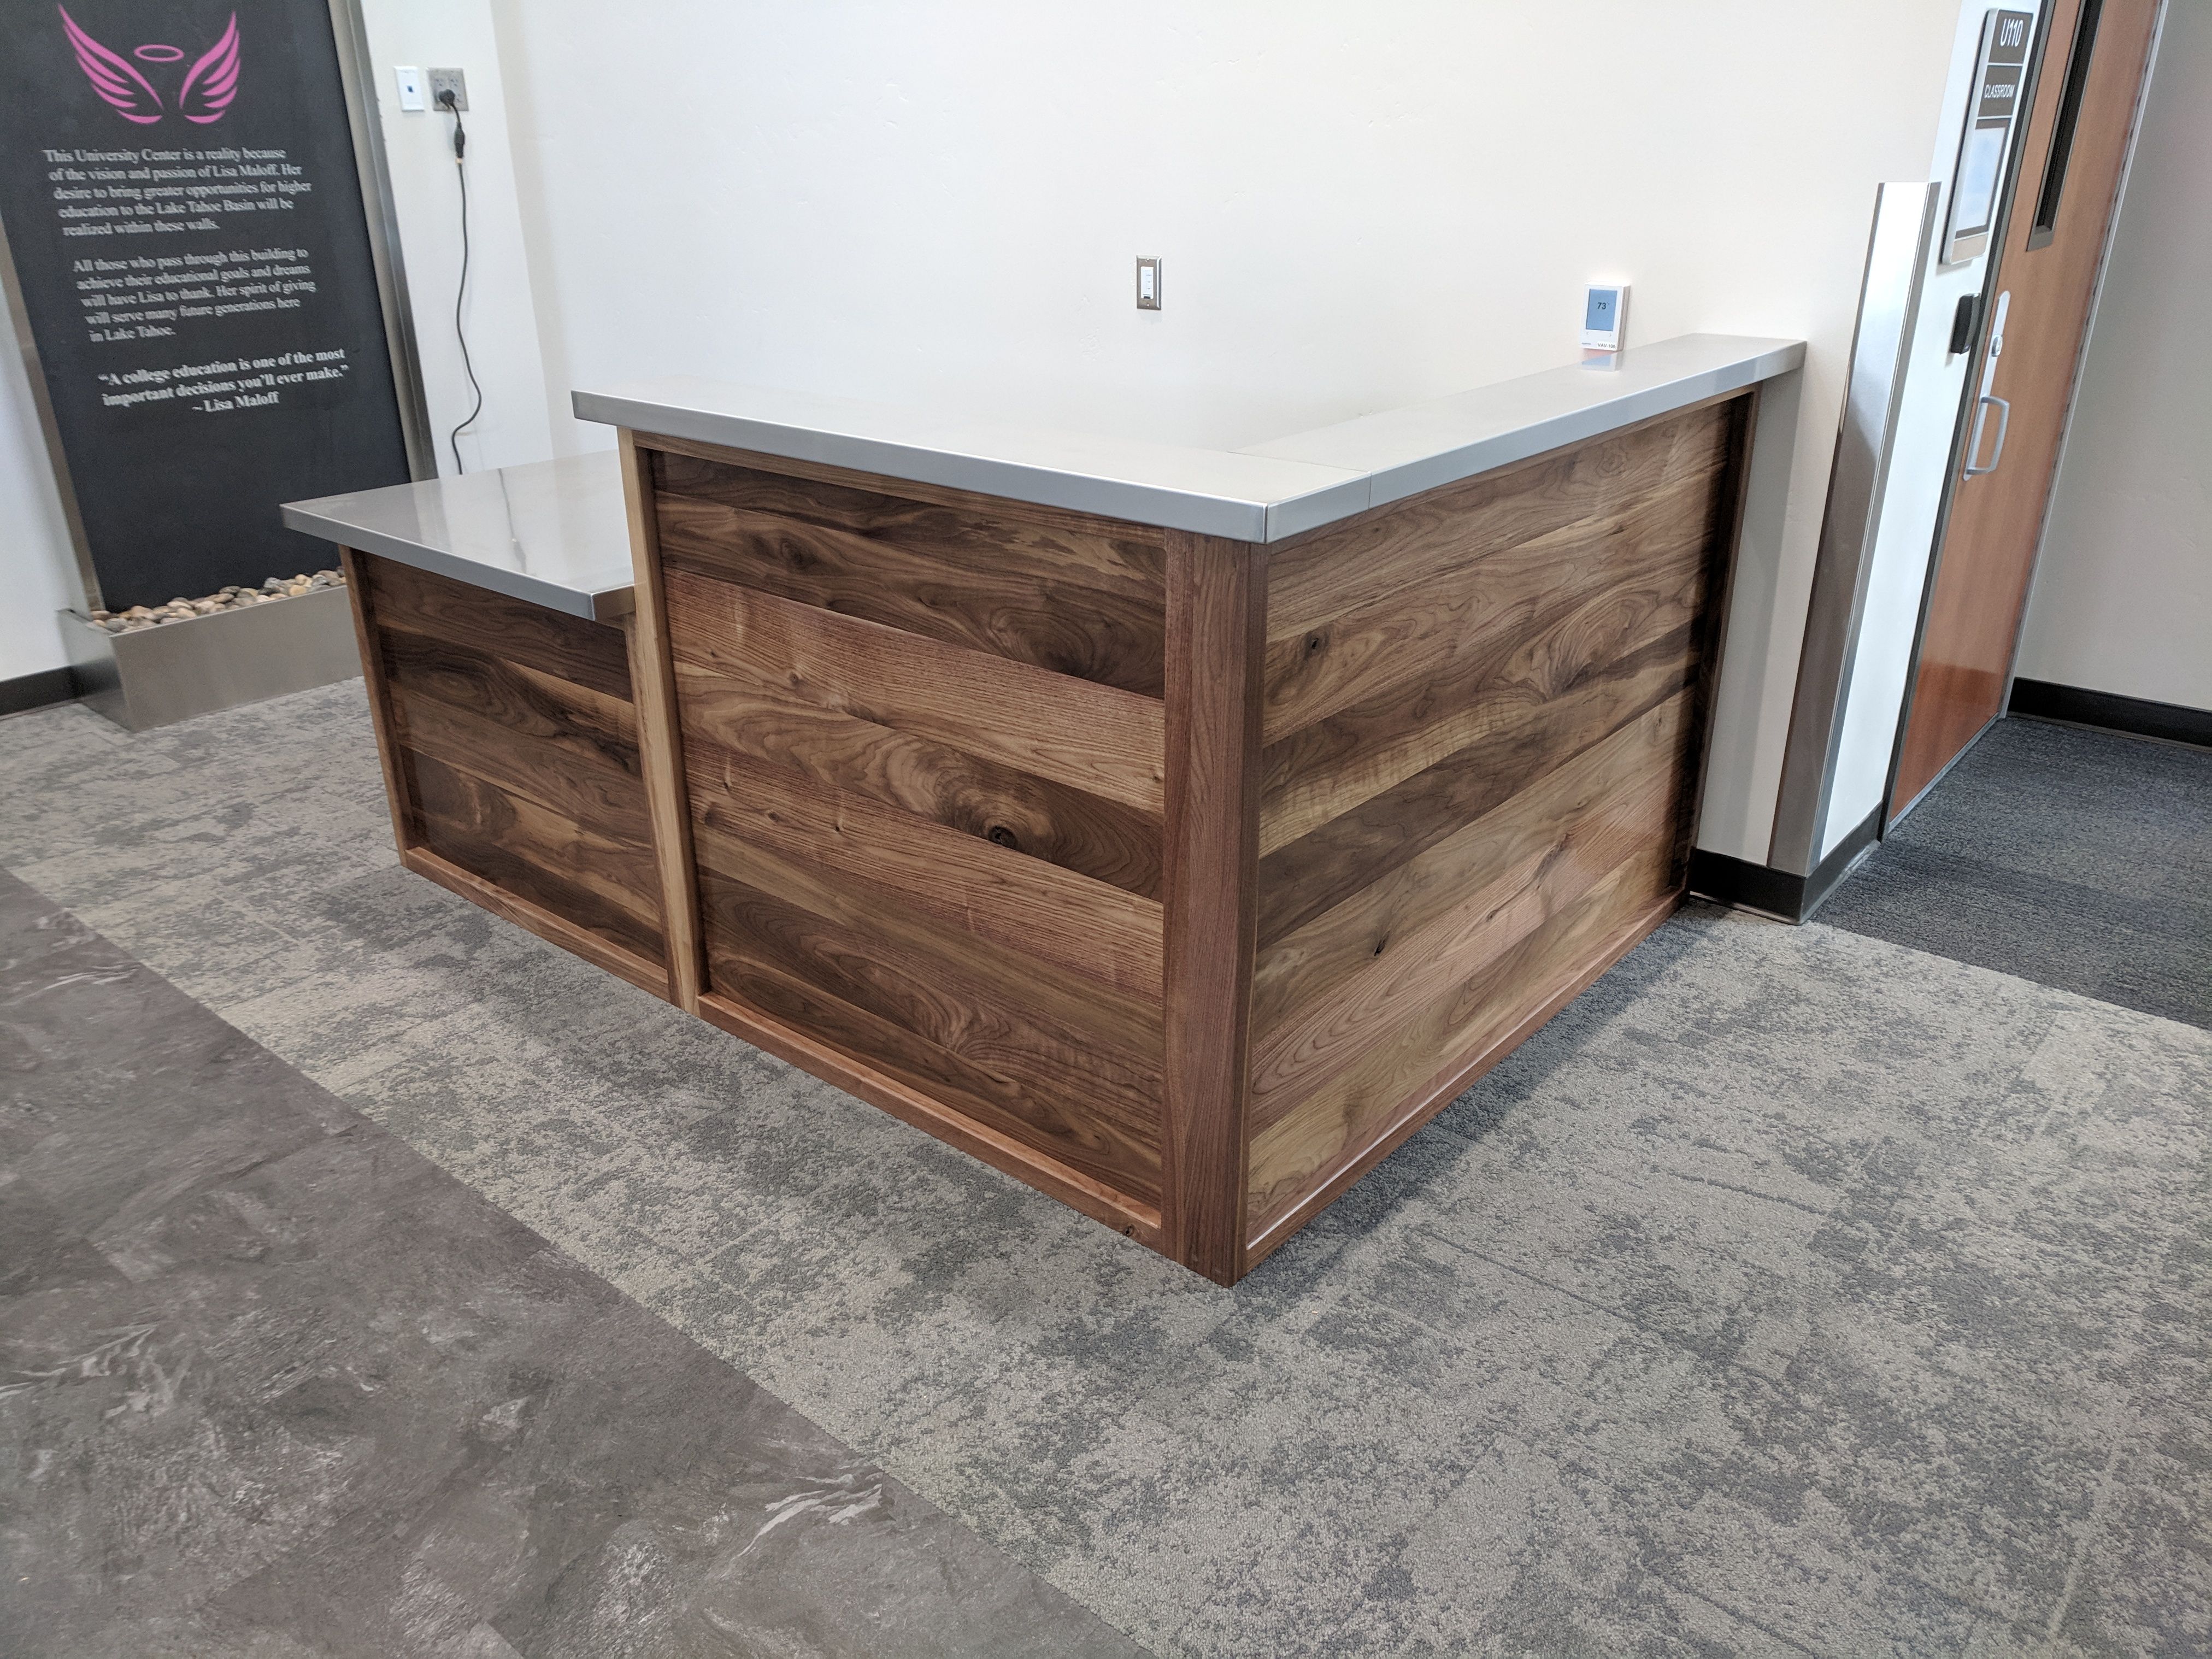 Custom Walnut And Stainless Steel Reception Desk By Re Dwell